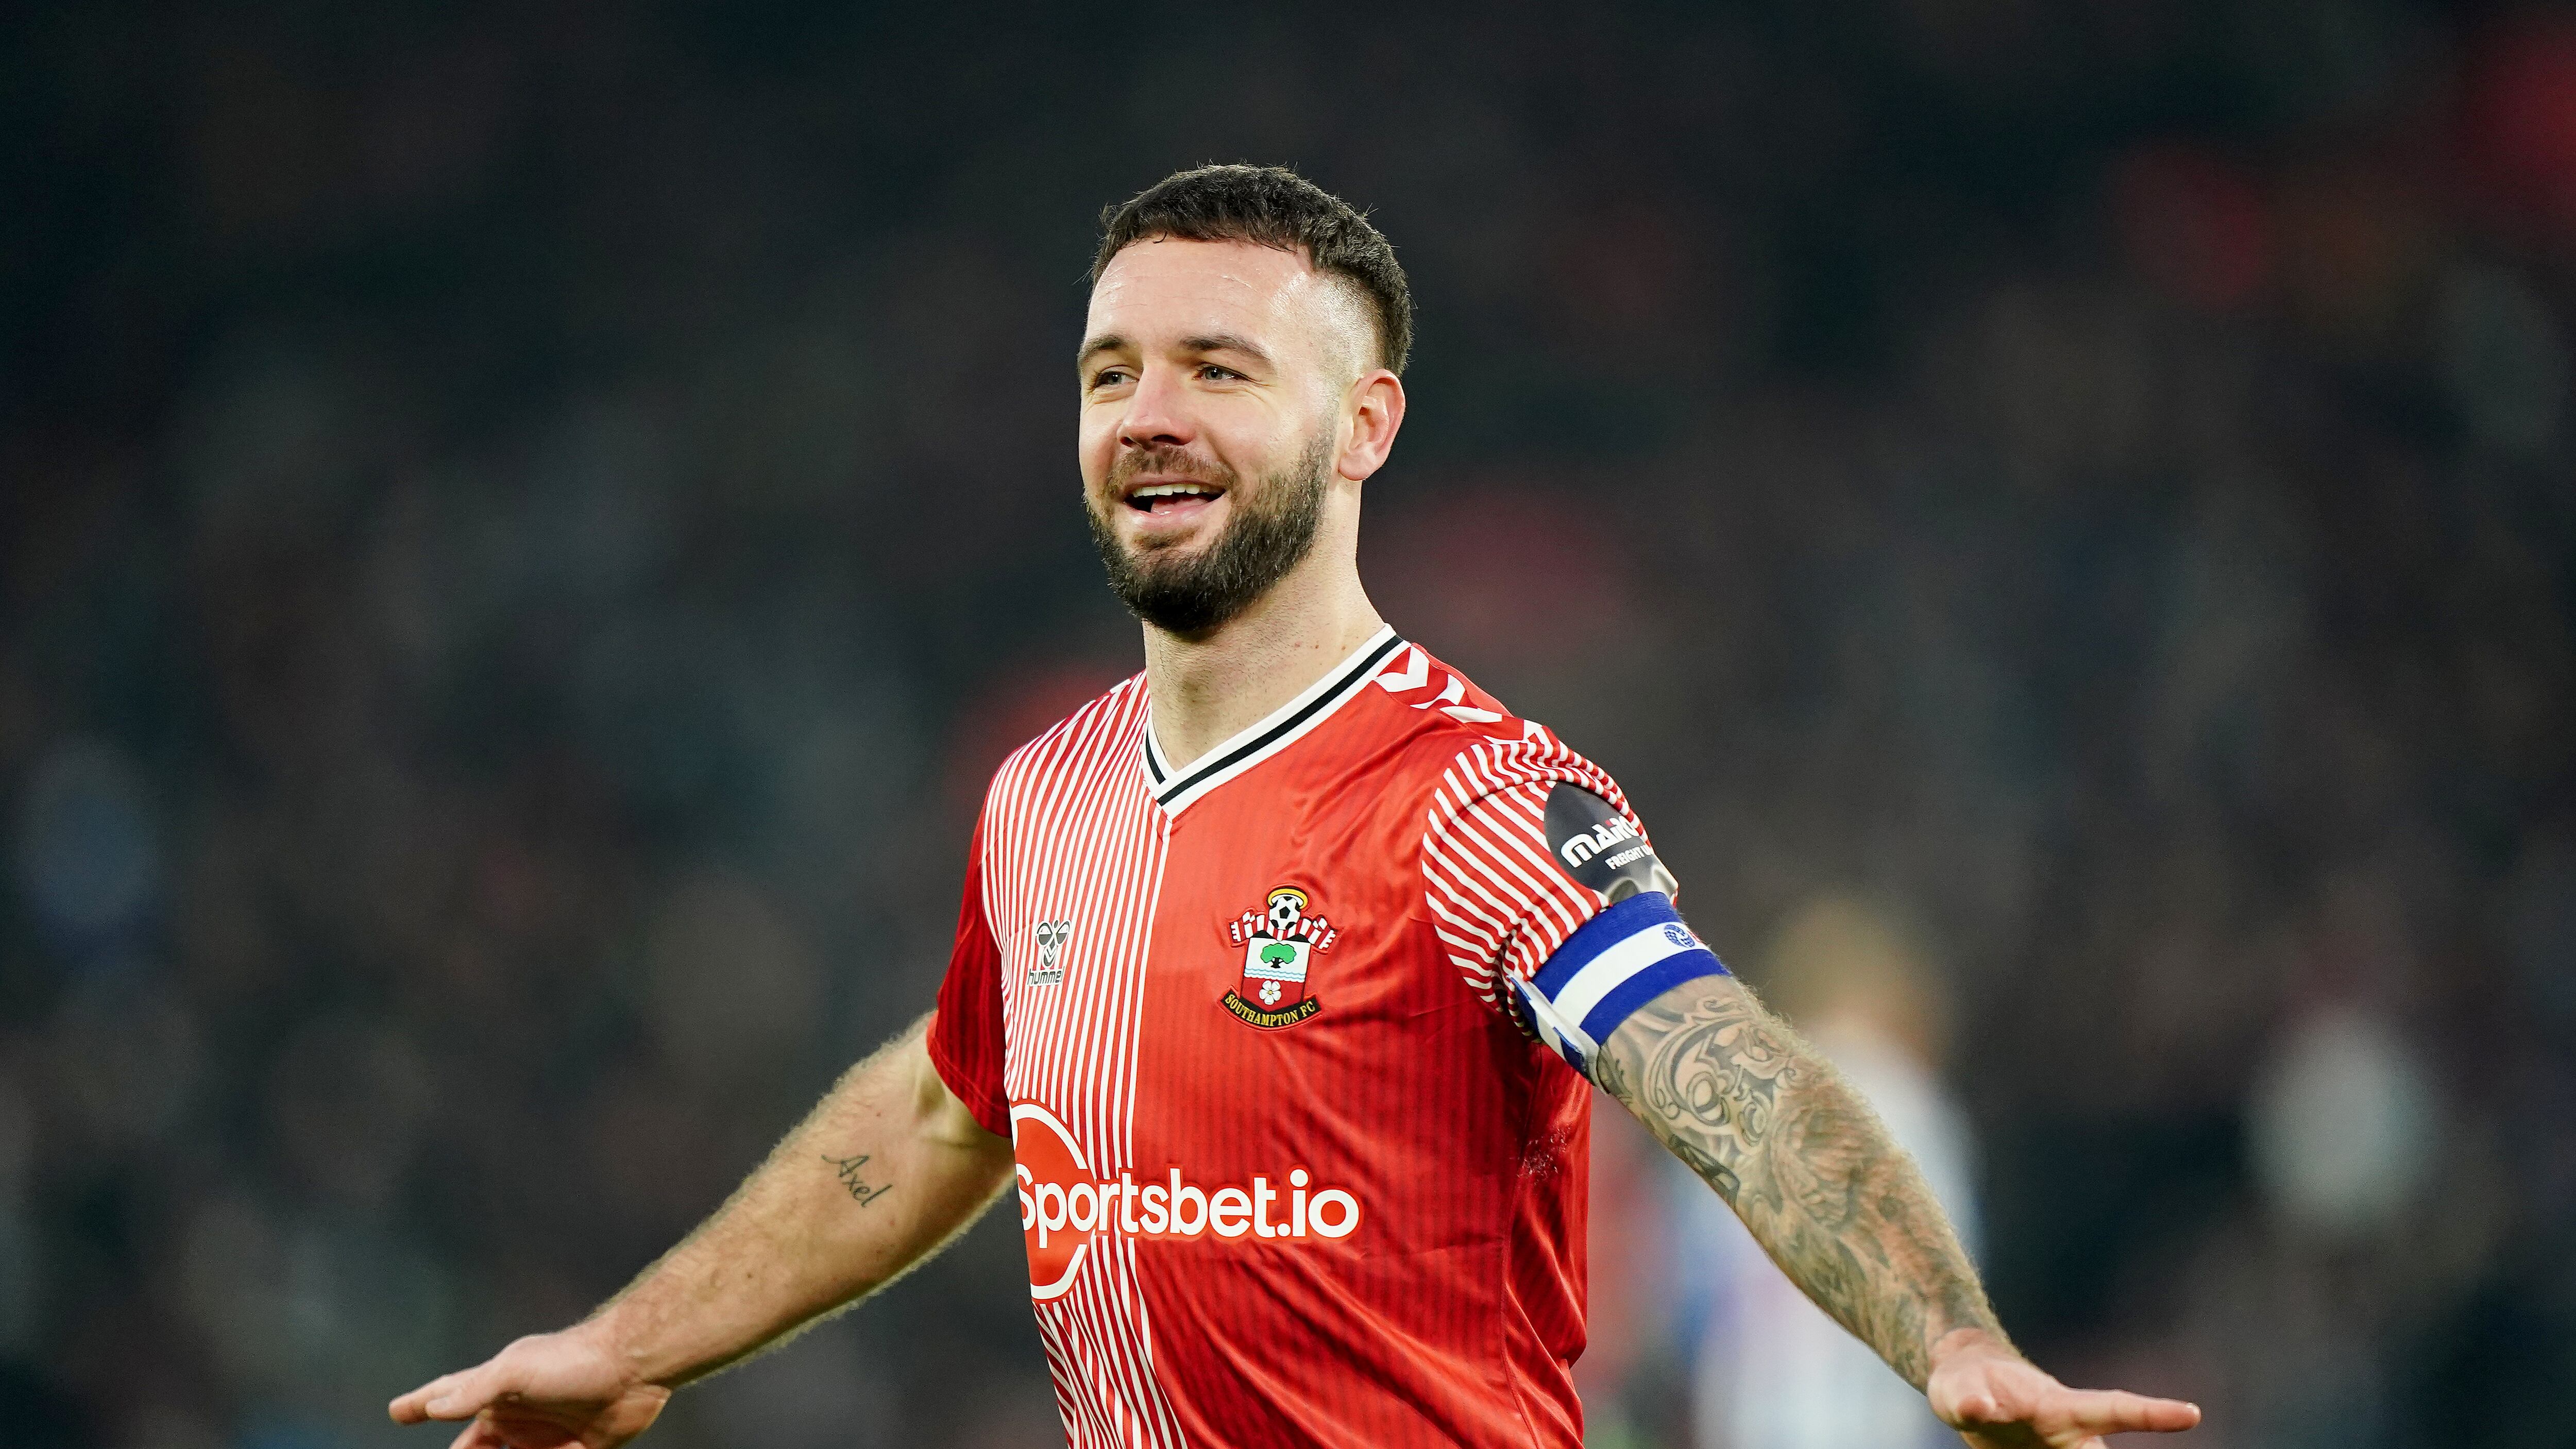 The goals of Adam Armstrong helped fire Southampton back into the top flight